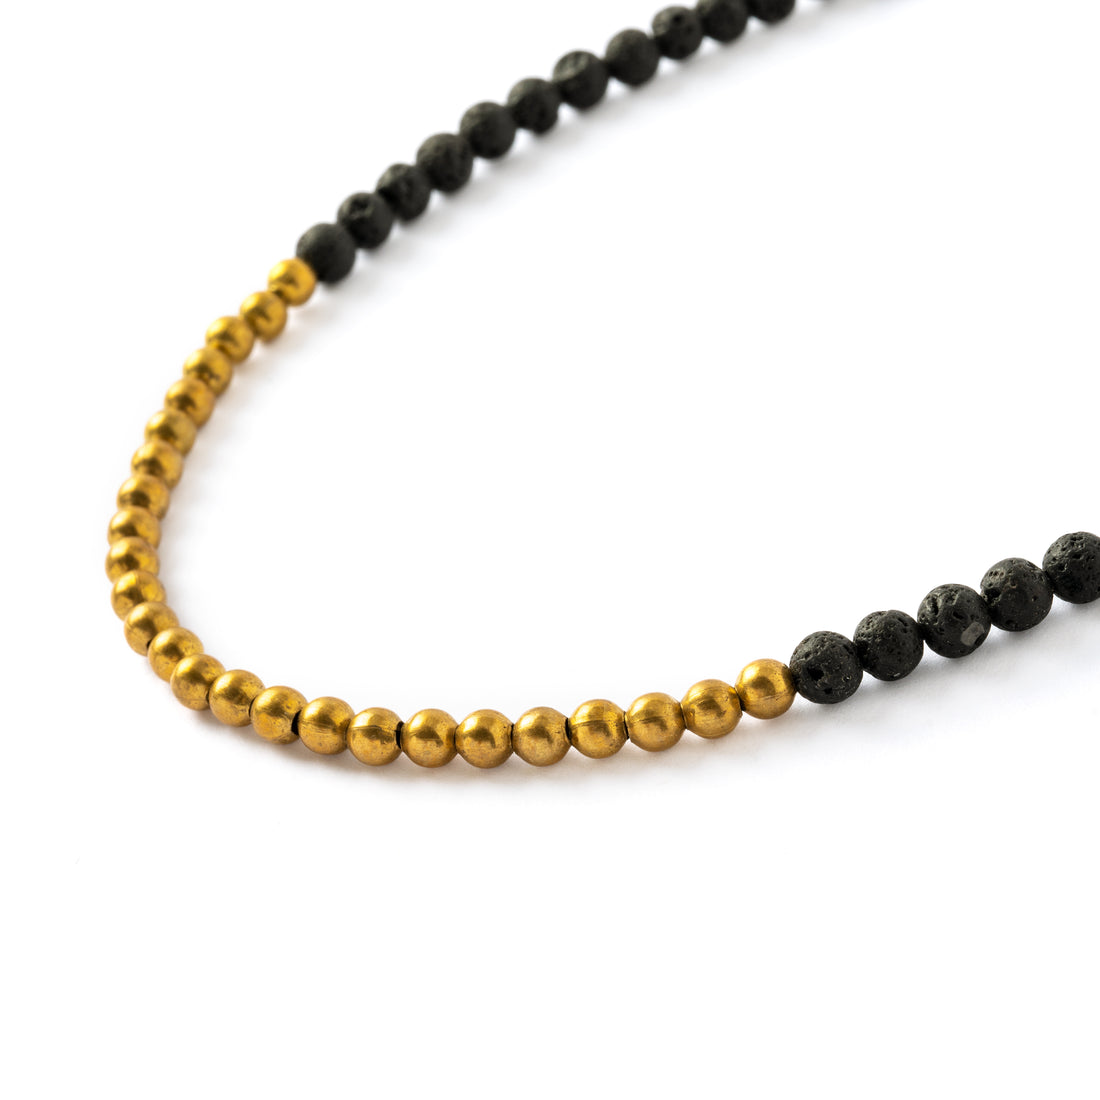 Lava Bead Necklace with Brass close up view